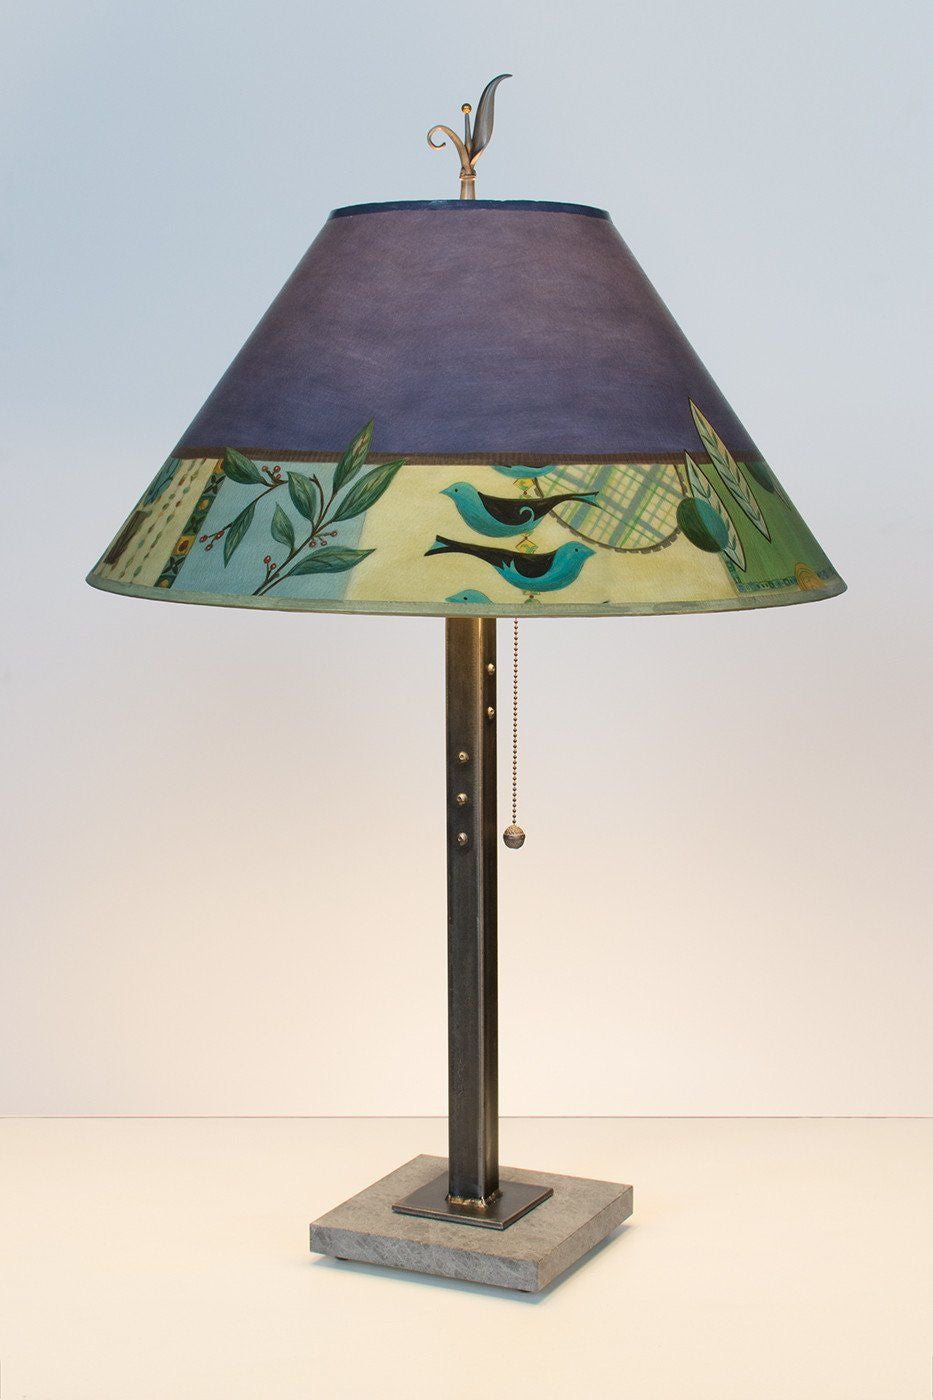 Steel Table Lamp on Italian Marble with Large Conical Shade in New Capri Periwinkle